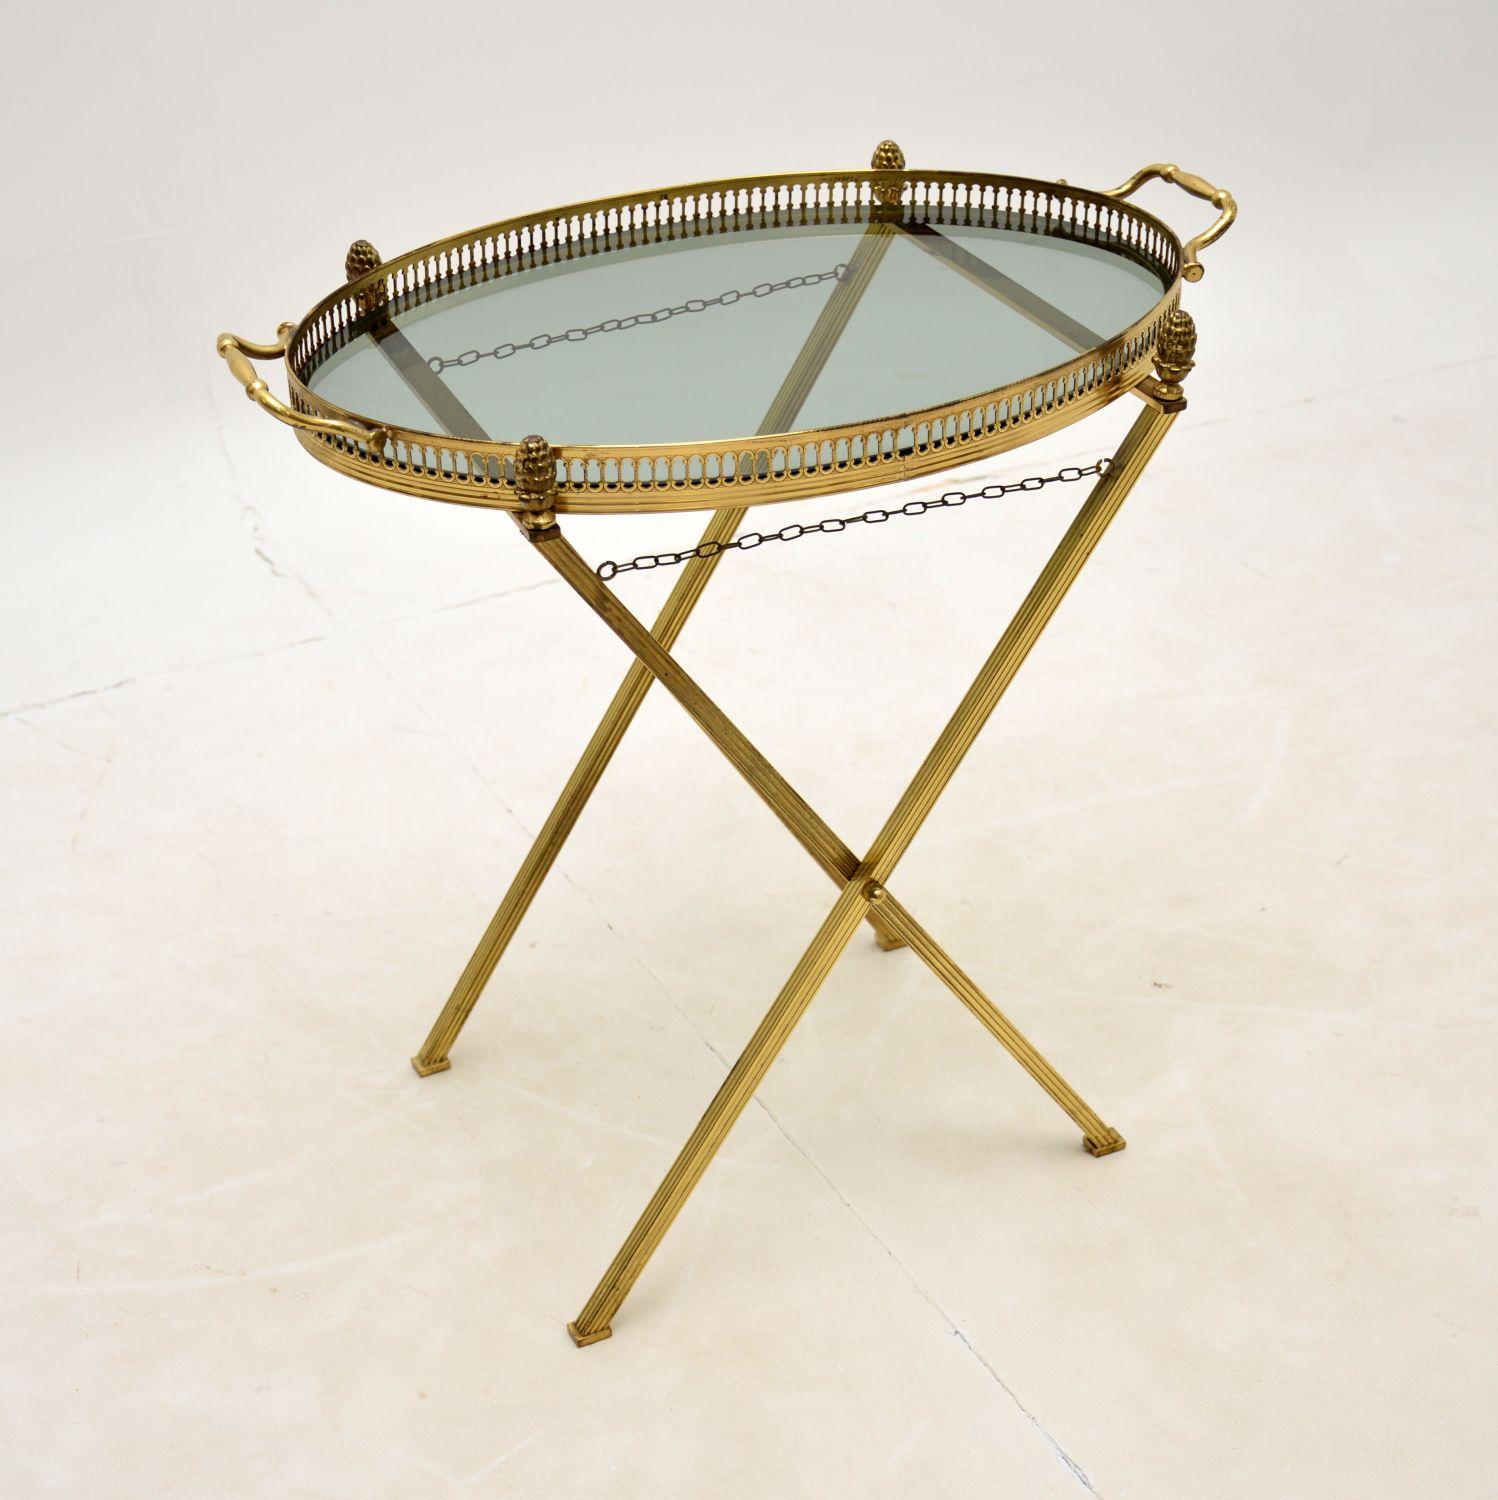 A beautiful and very unusual vintage folding side table in brass. This was made in France, it dates from the 1950-60’s.

The quality is excellent, this is solid brass throughout. The base has a folding mechanism to be stored away flat, and the